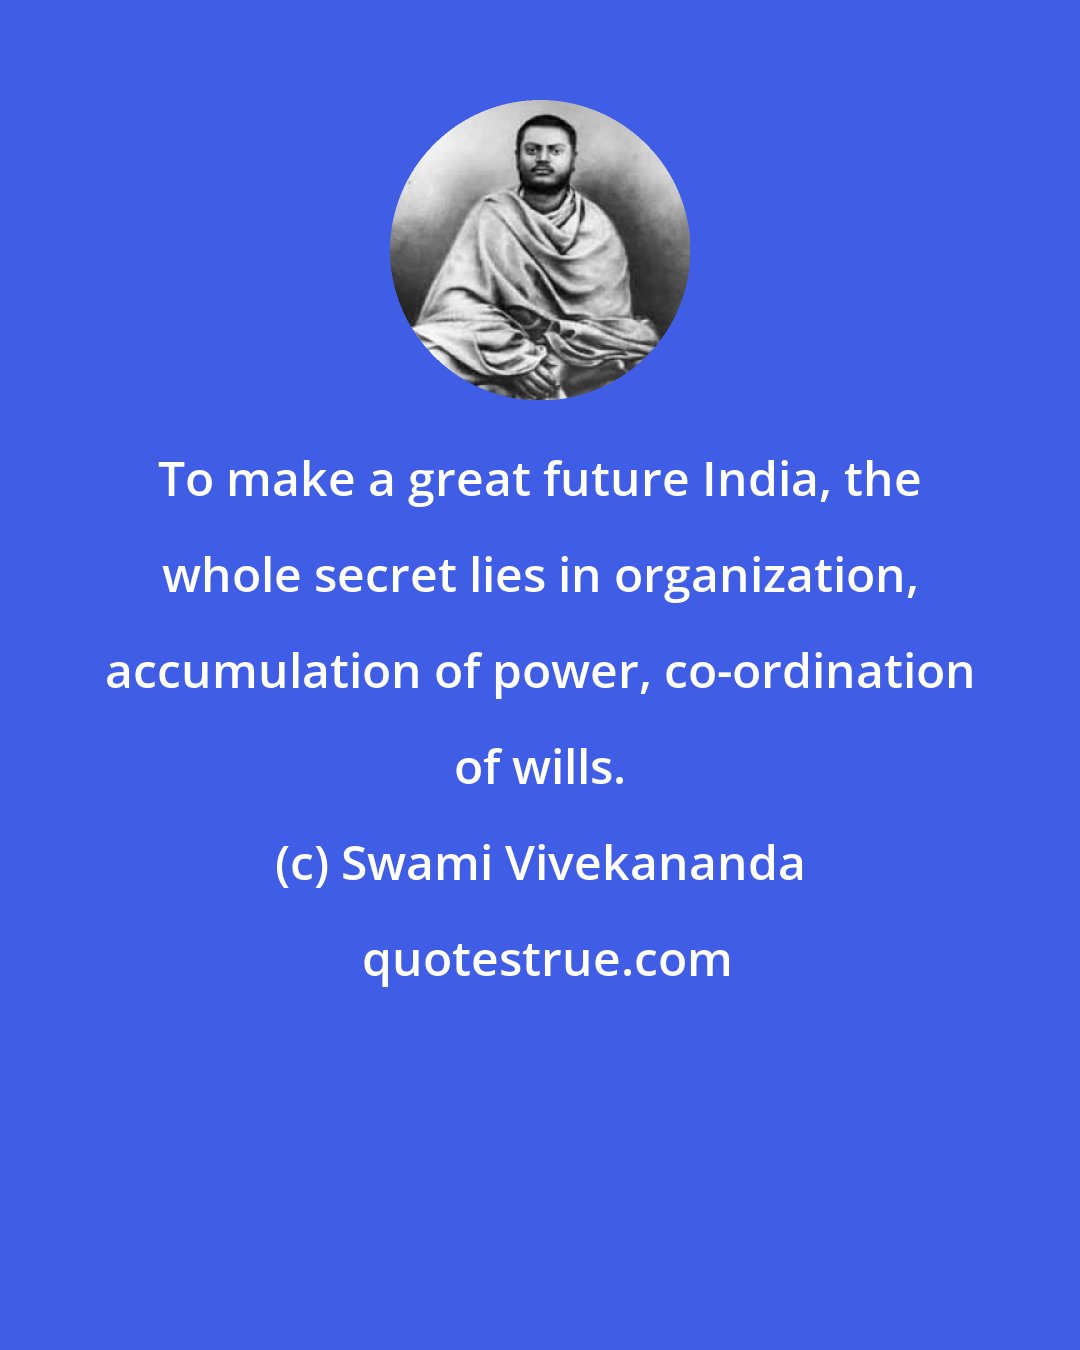 Swami Vivekananda: To make a great future India, the whole secret lies in organization, accumulation of power, co-ordination of wills.